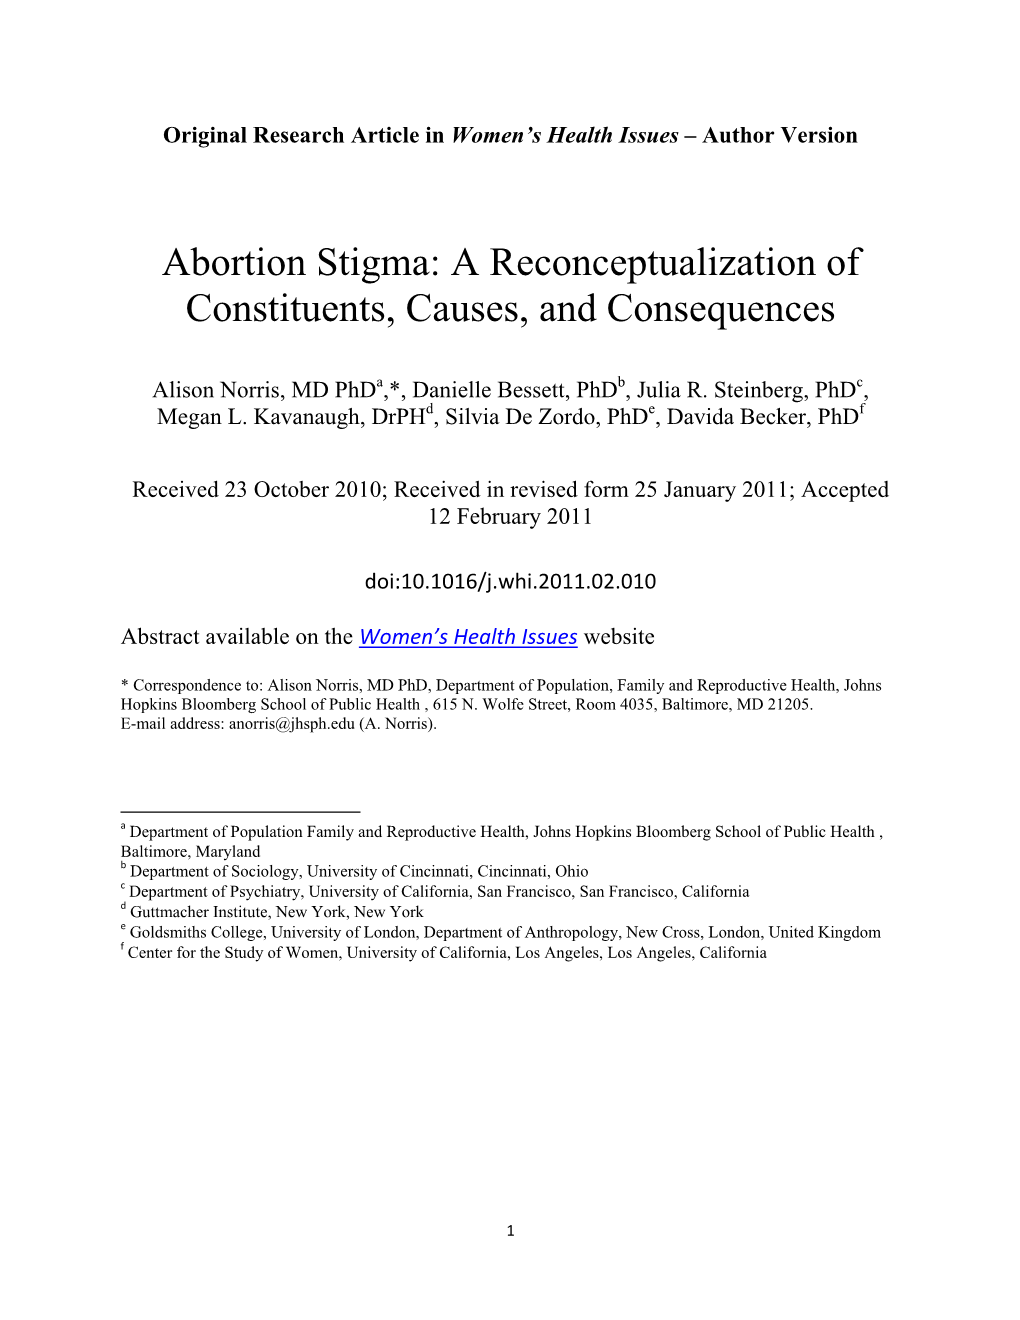 Abortion Stigma: a Reconceptualization of Constituents, Causes, and Consequences